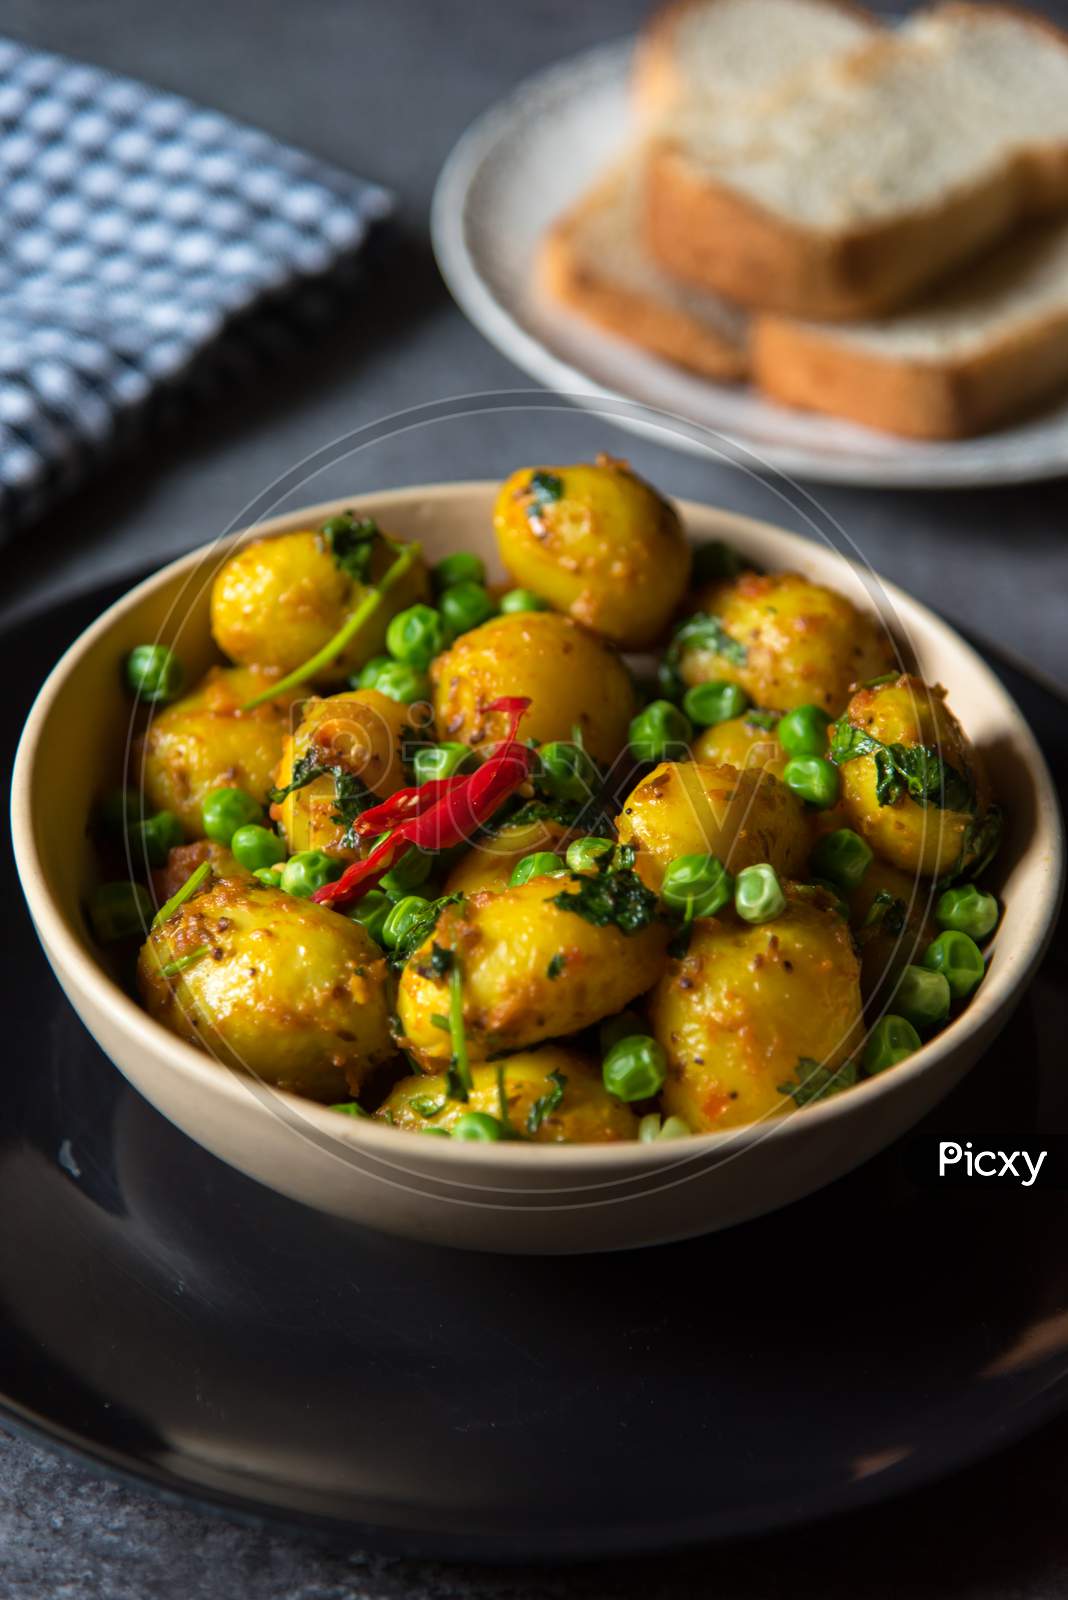 Indian dum aloo or potatoes, a spicy dish in a bowl.